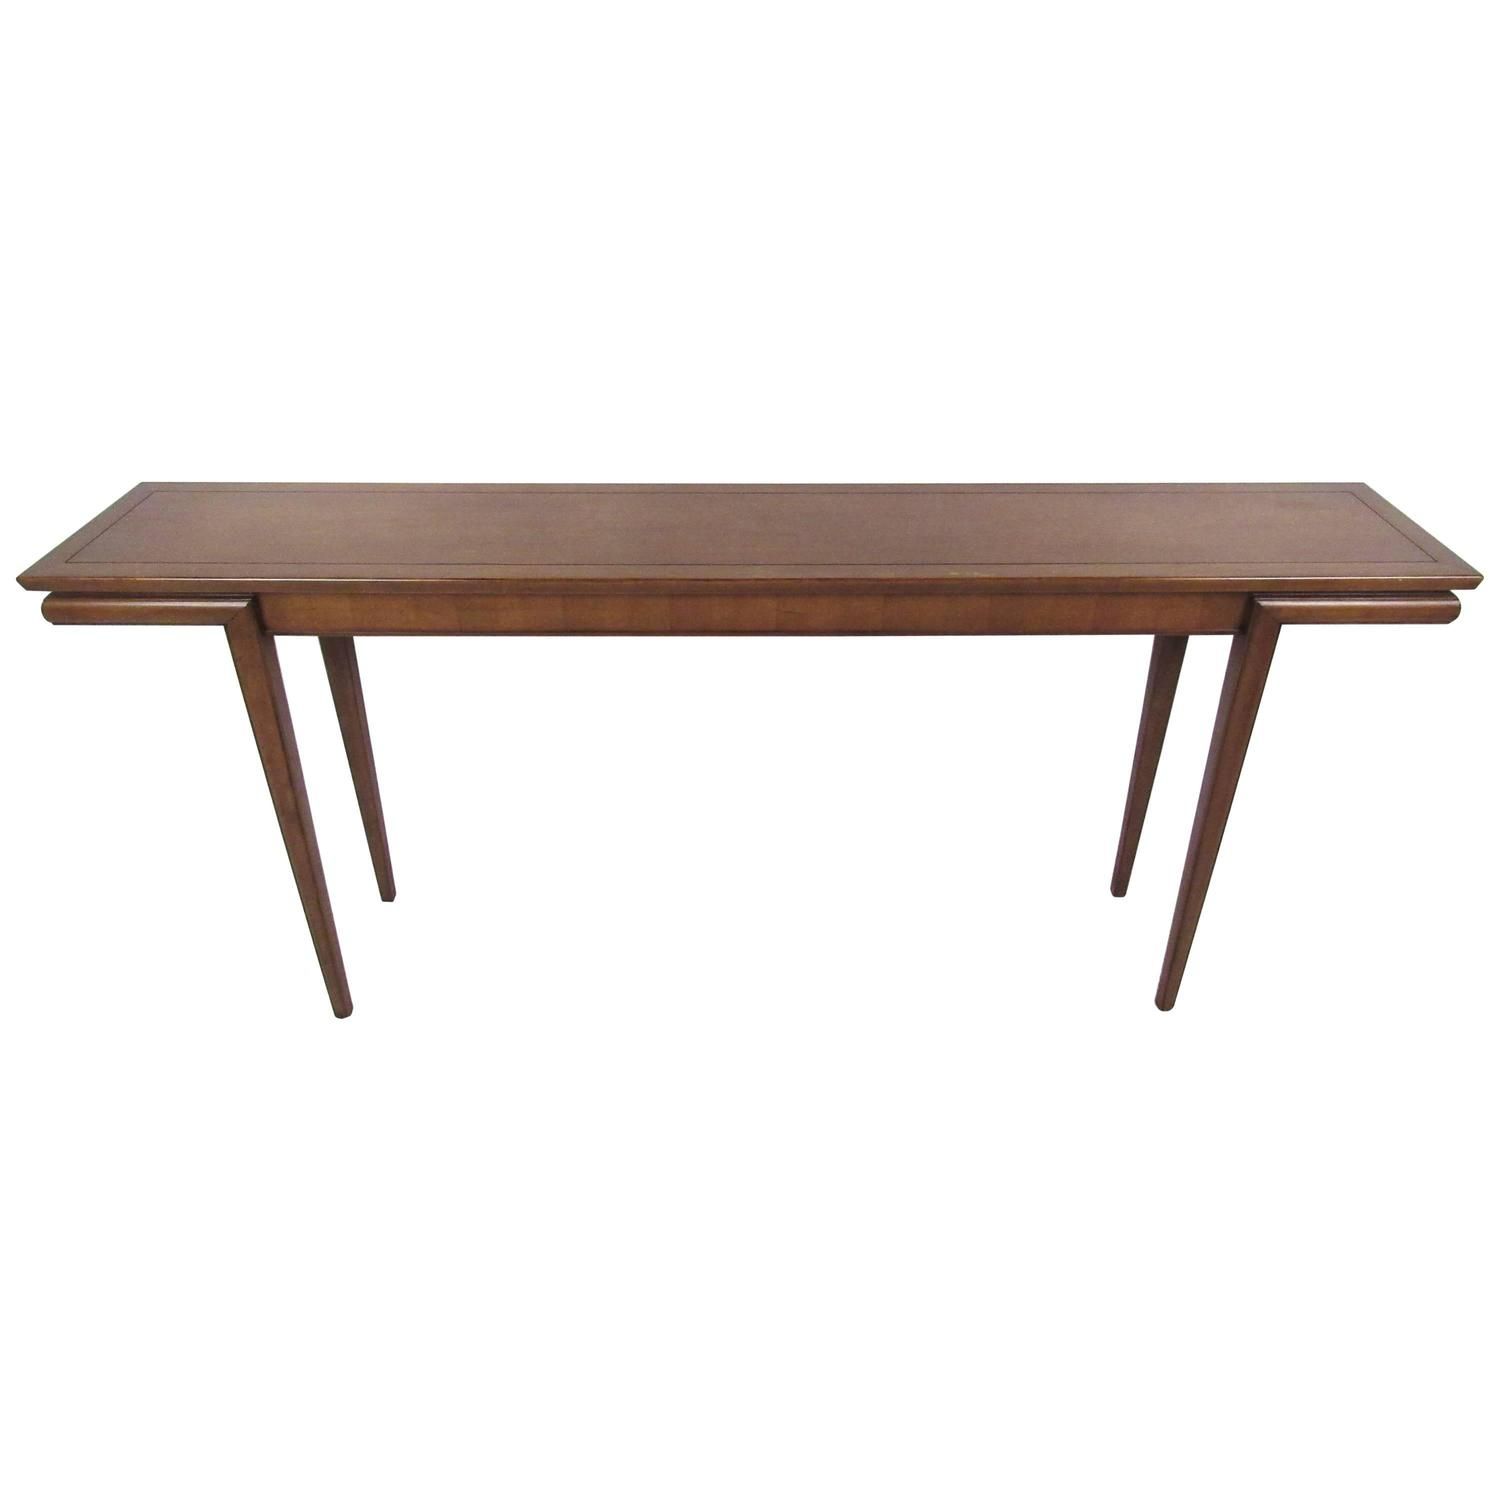 Mid Century Modern American Walnut Console Table At 1stdibs Inside Walnut Console Tables (View 12 of 20)